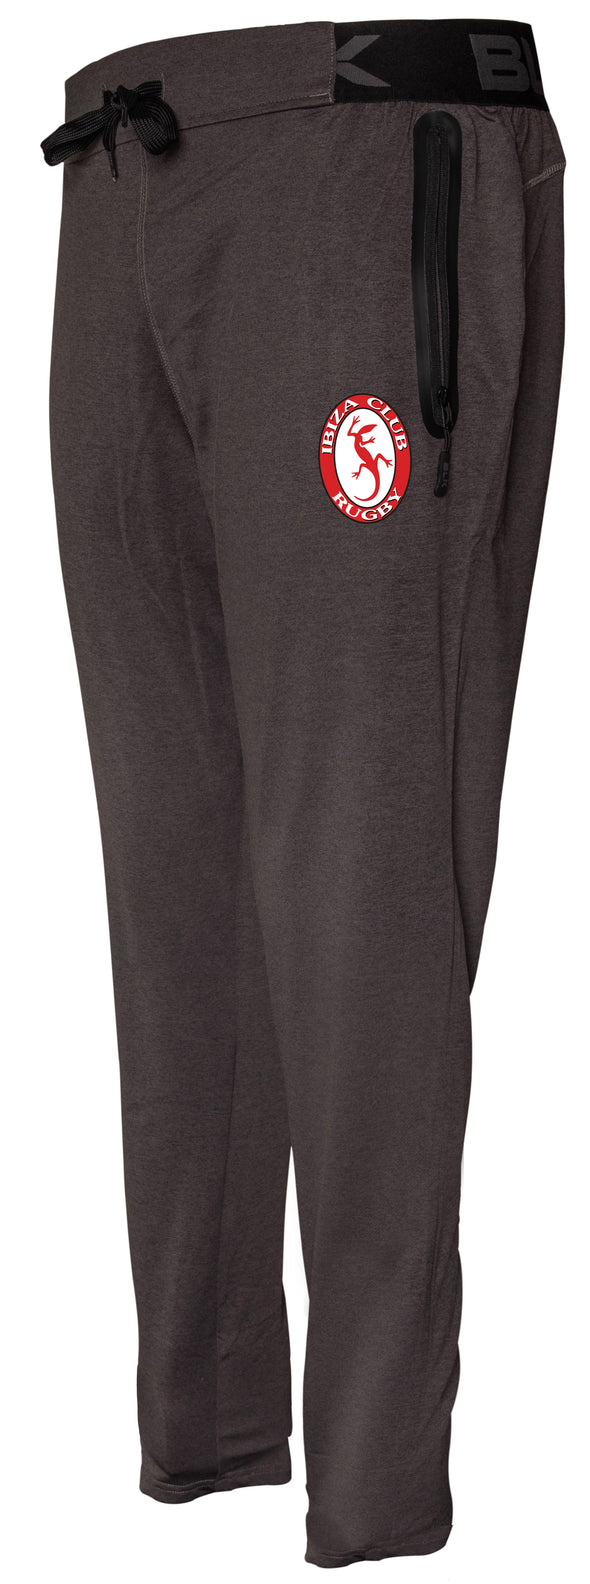 Ibiza Rugby Tapered Training Pant - Charcoal